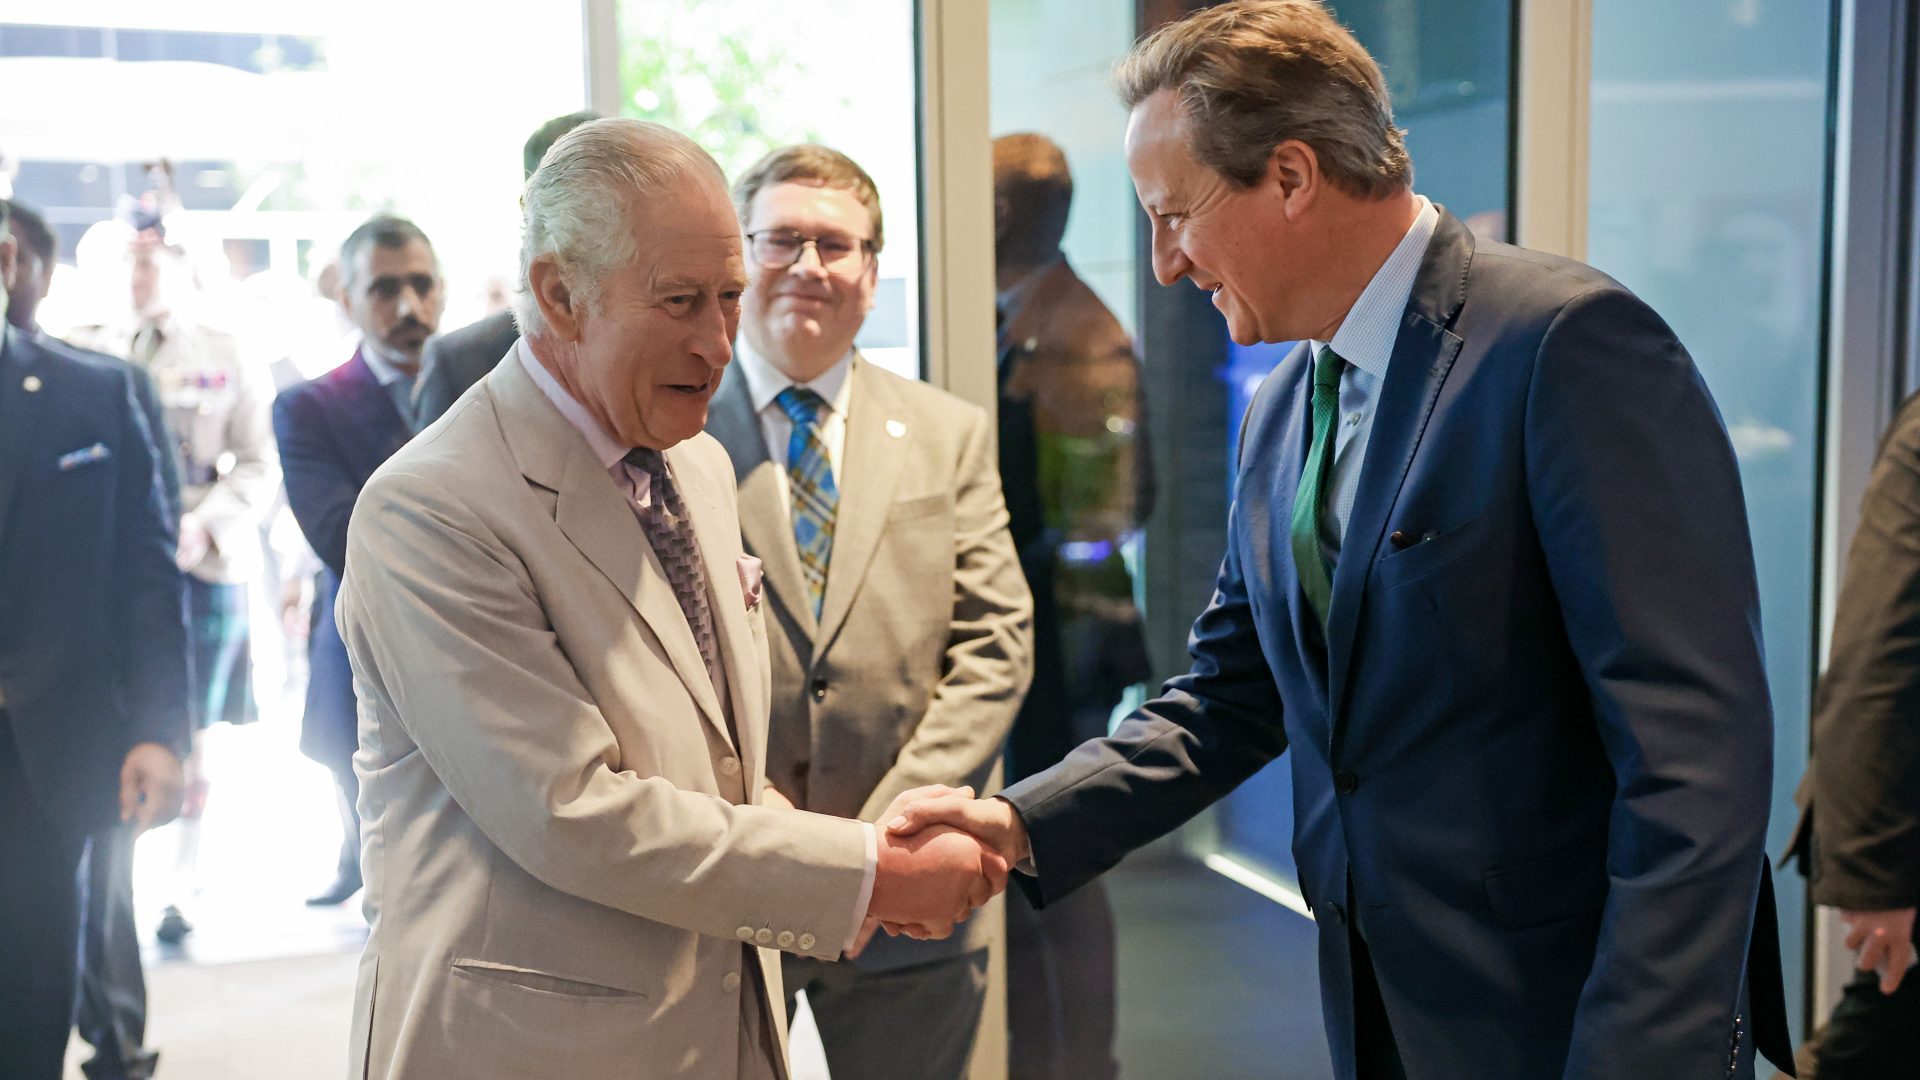 King Charles III greets UK Secretary of State for Foreign Affairs David Cameron during a visit at the Heriot-Watt University to formally open the Dubai campus during COP28. Photo: Chris Jackson/Getty Images